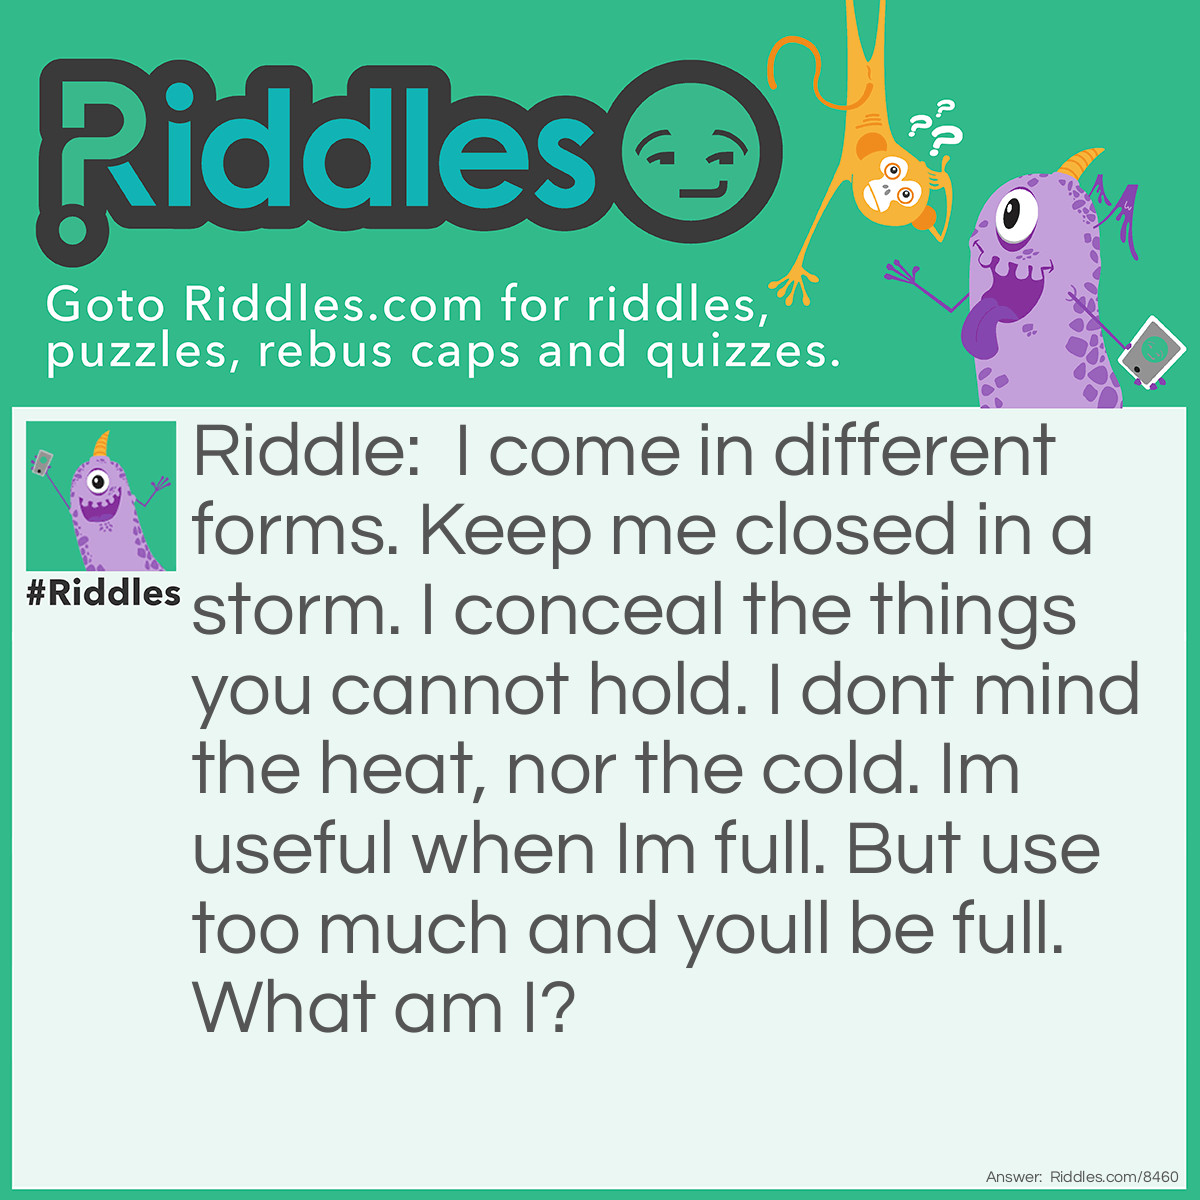 Riddle: I come in different forms. Keep me closed in a storm. I conceal the things you cannot hold. I don't mind the heat, nor the cold. Im useful when Im full. But use too much and youll be full. What am I? Answer: A bottle.